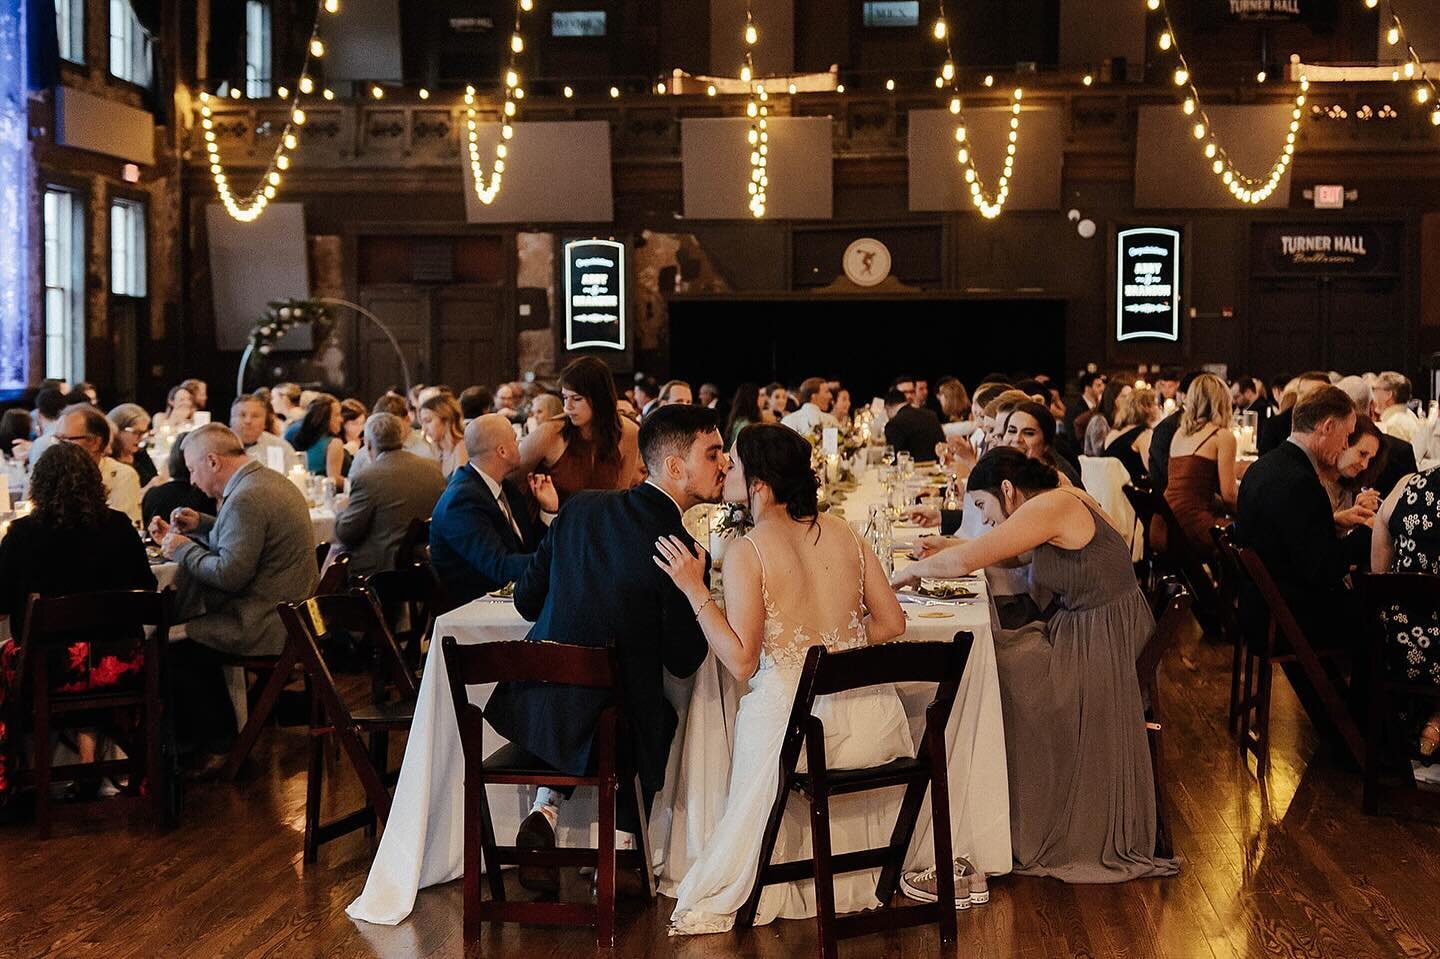 The first kiss as a married couple beneath the string lights is unparalleled. Celebrate with your friends and your family in a big way at Turner Hall Ballroom and book your walkthrough today 💌

Photo by @citrinepinephoto